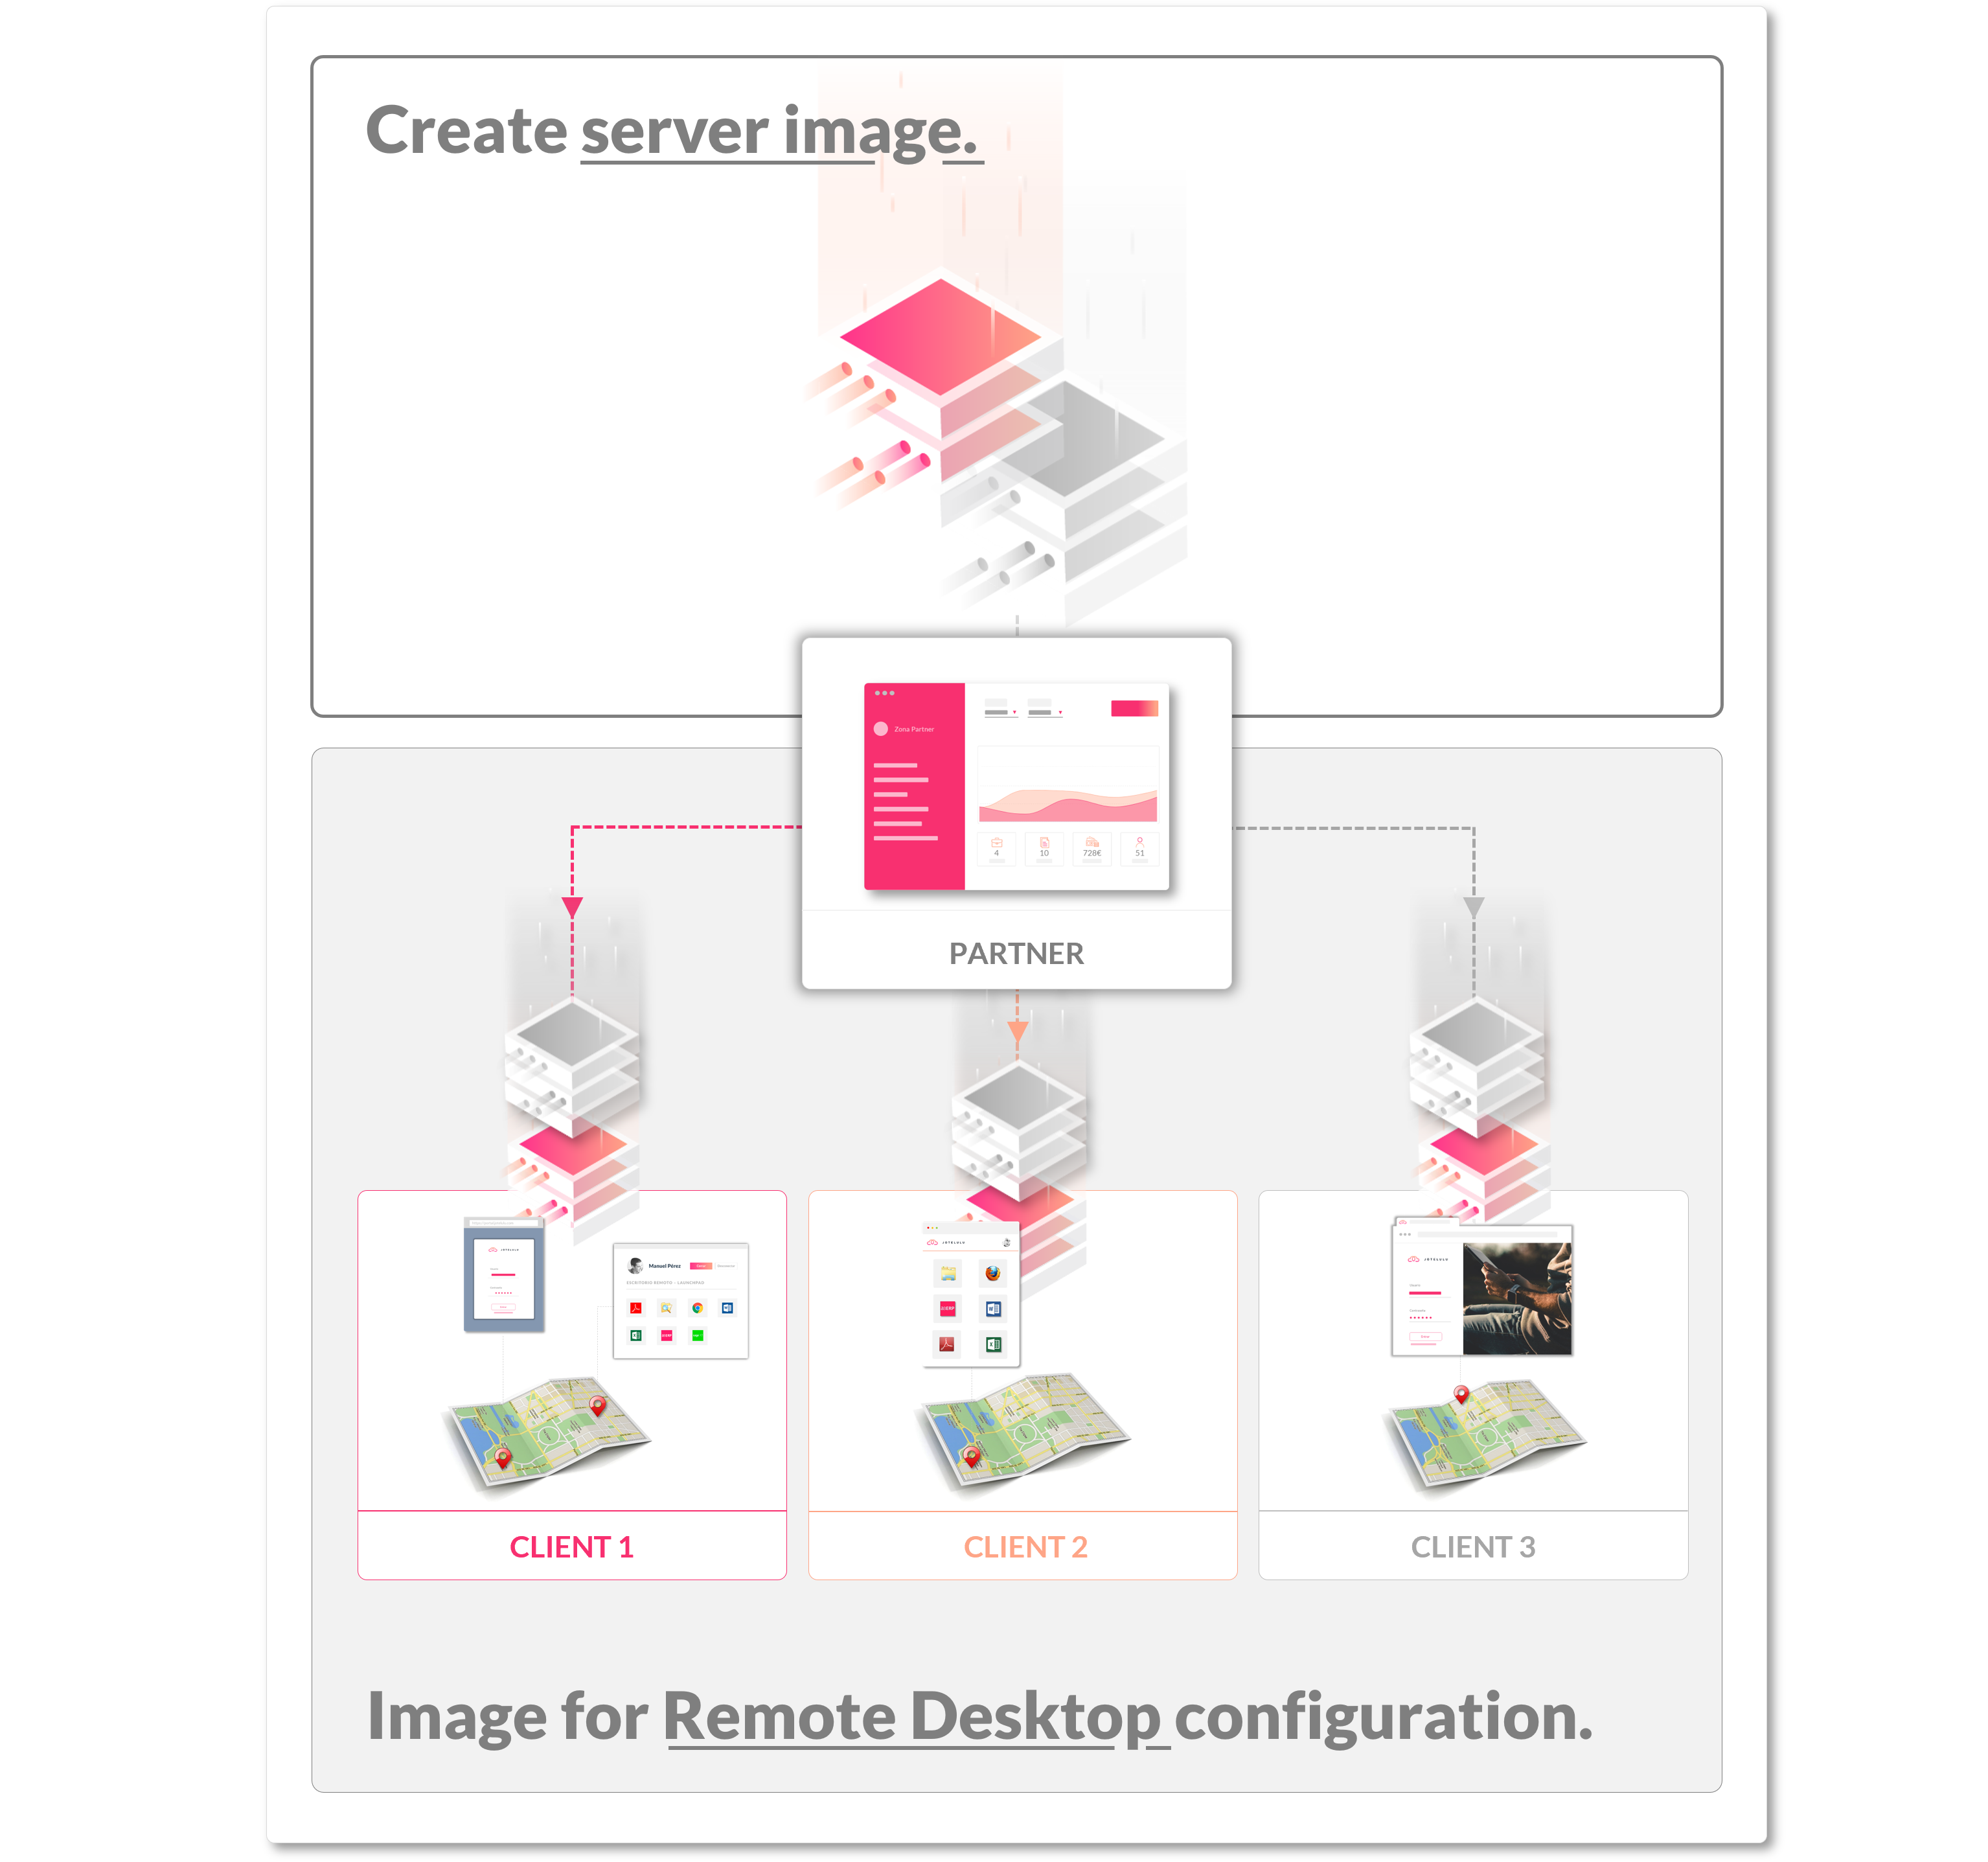 Simplified diagram showing how to create a server image to configure a new remote desktop